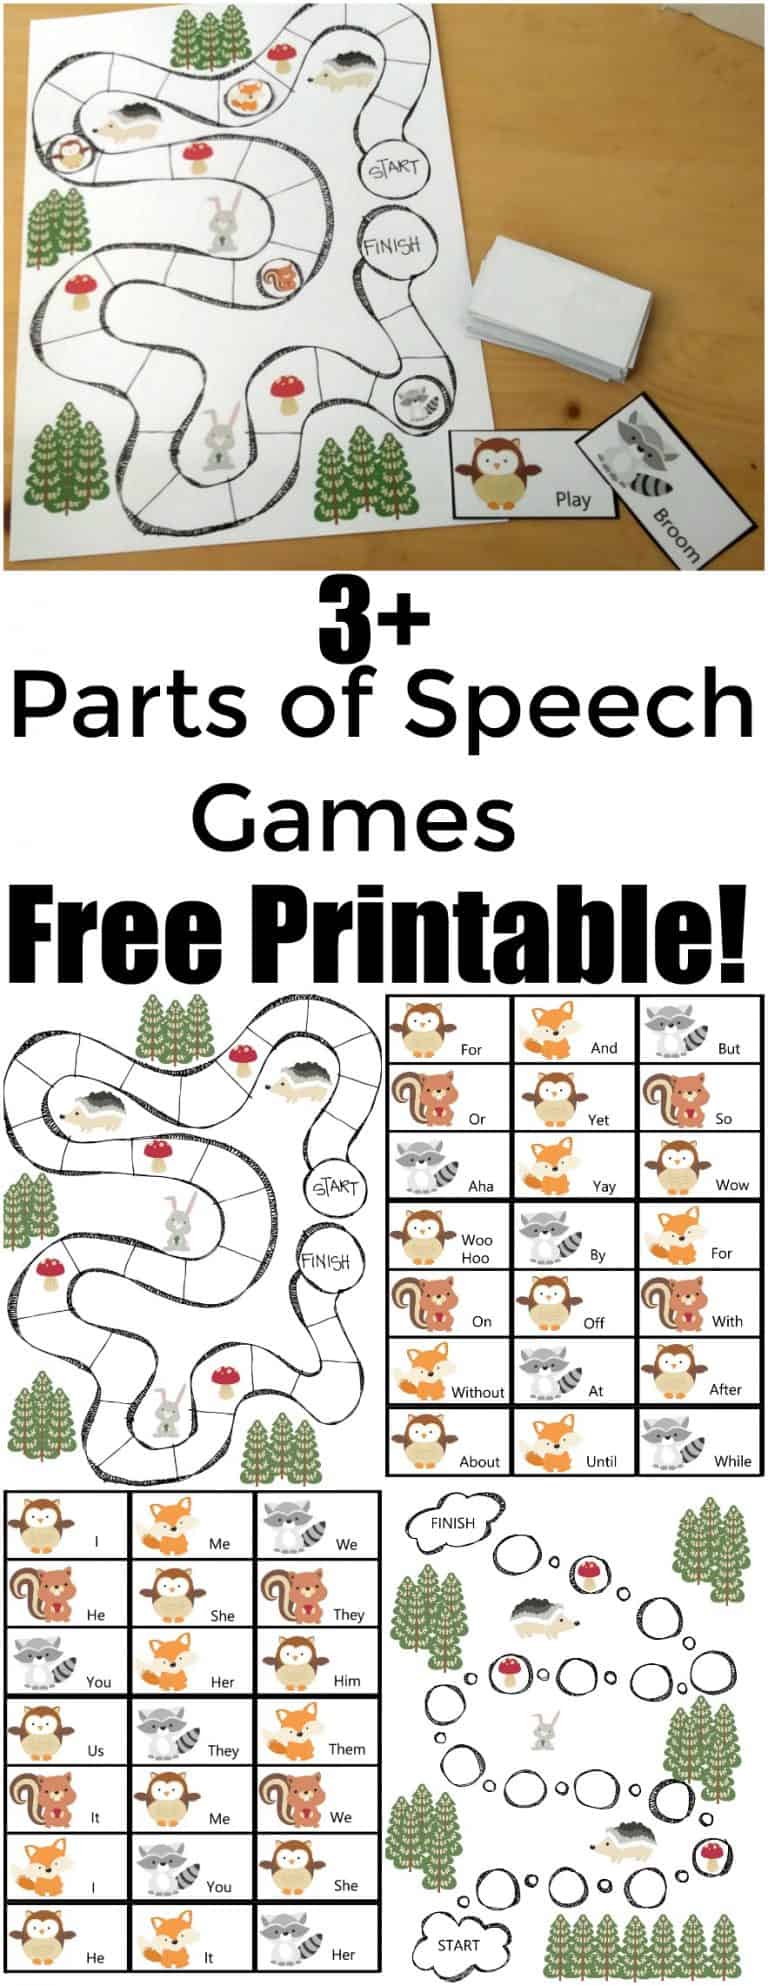 Parts of Speech Game – Free Printable